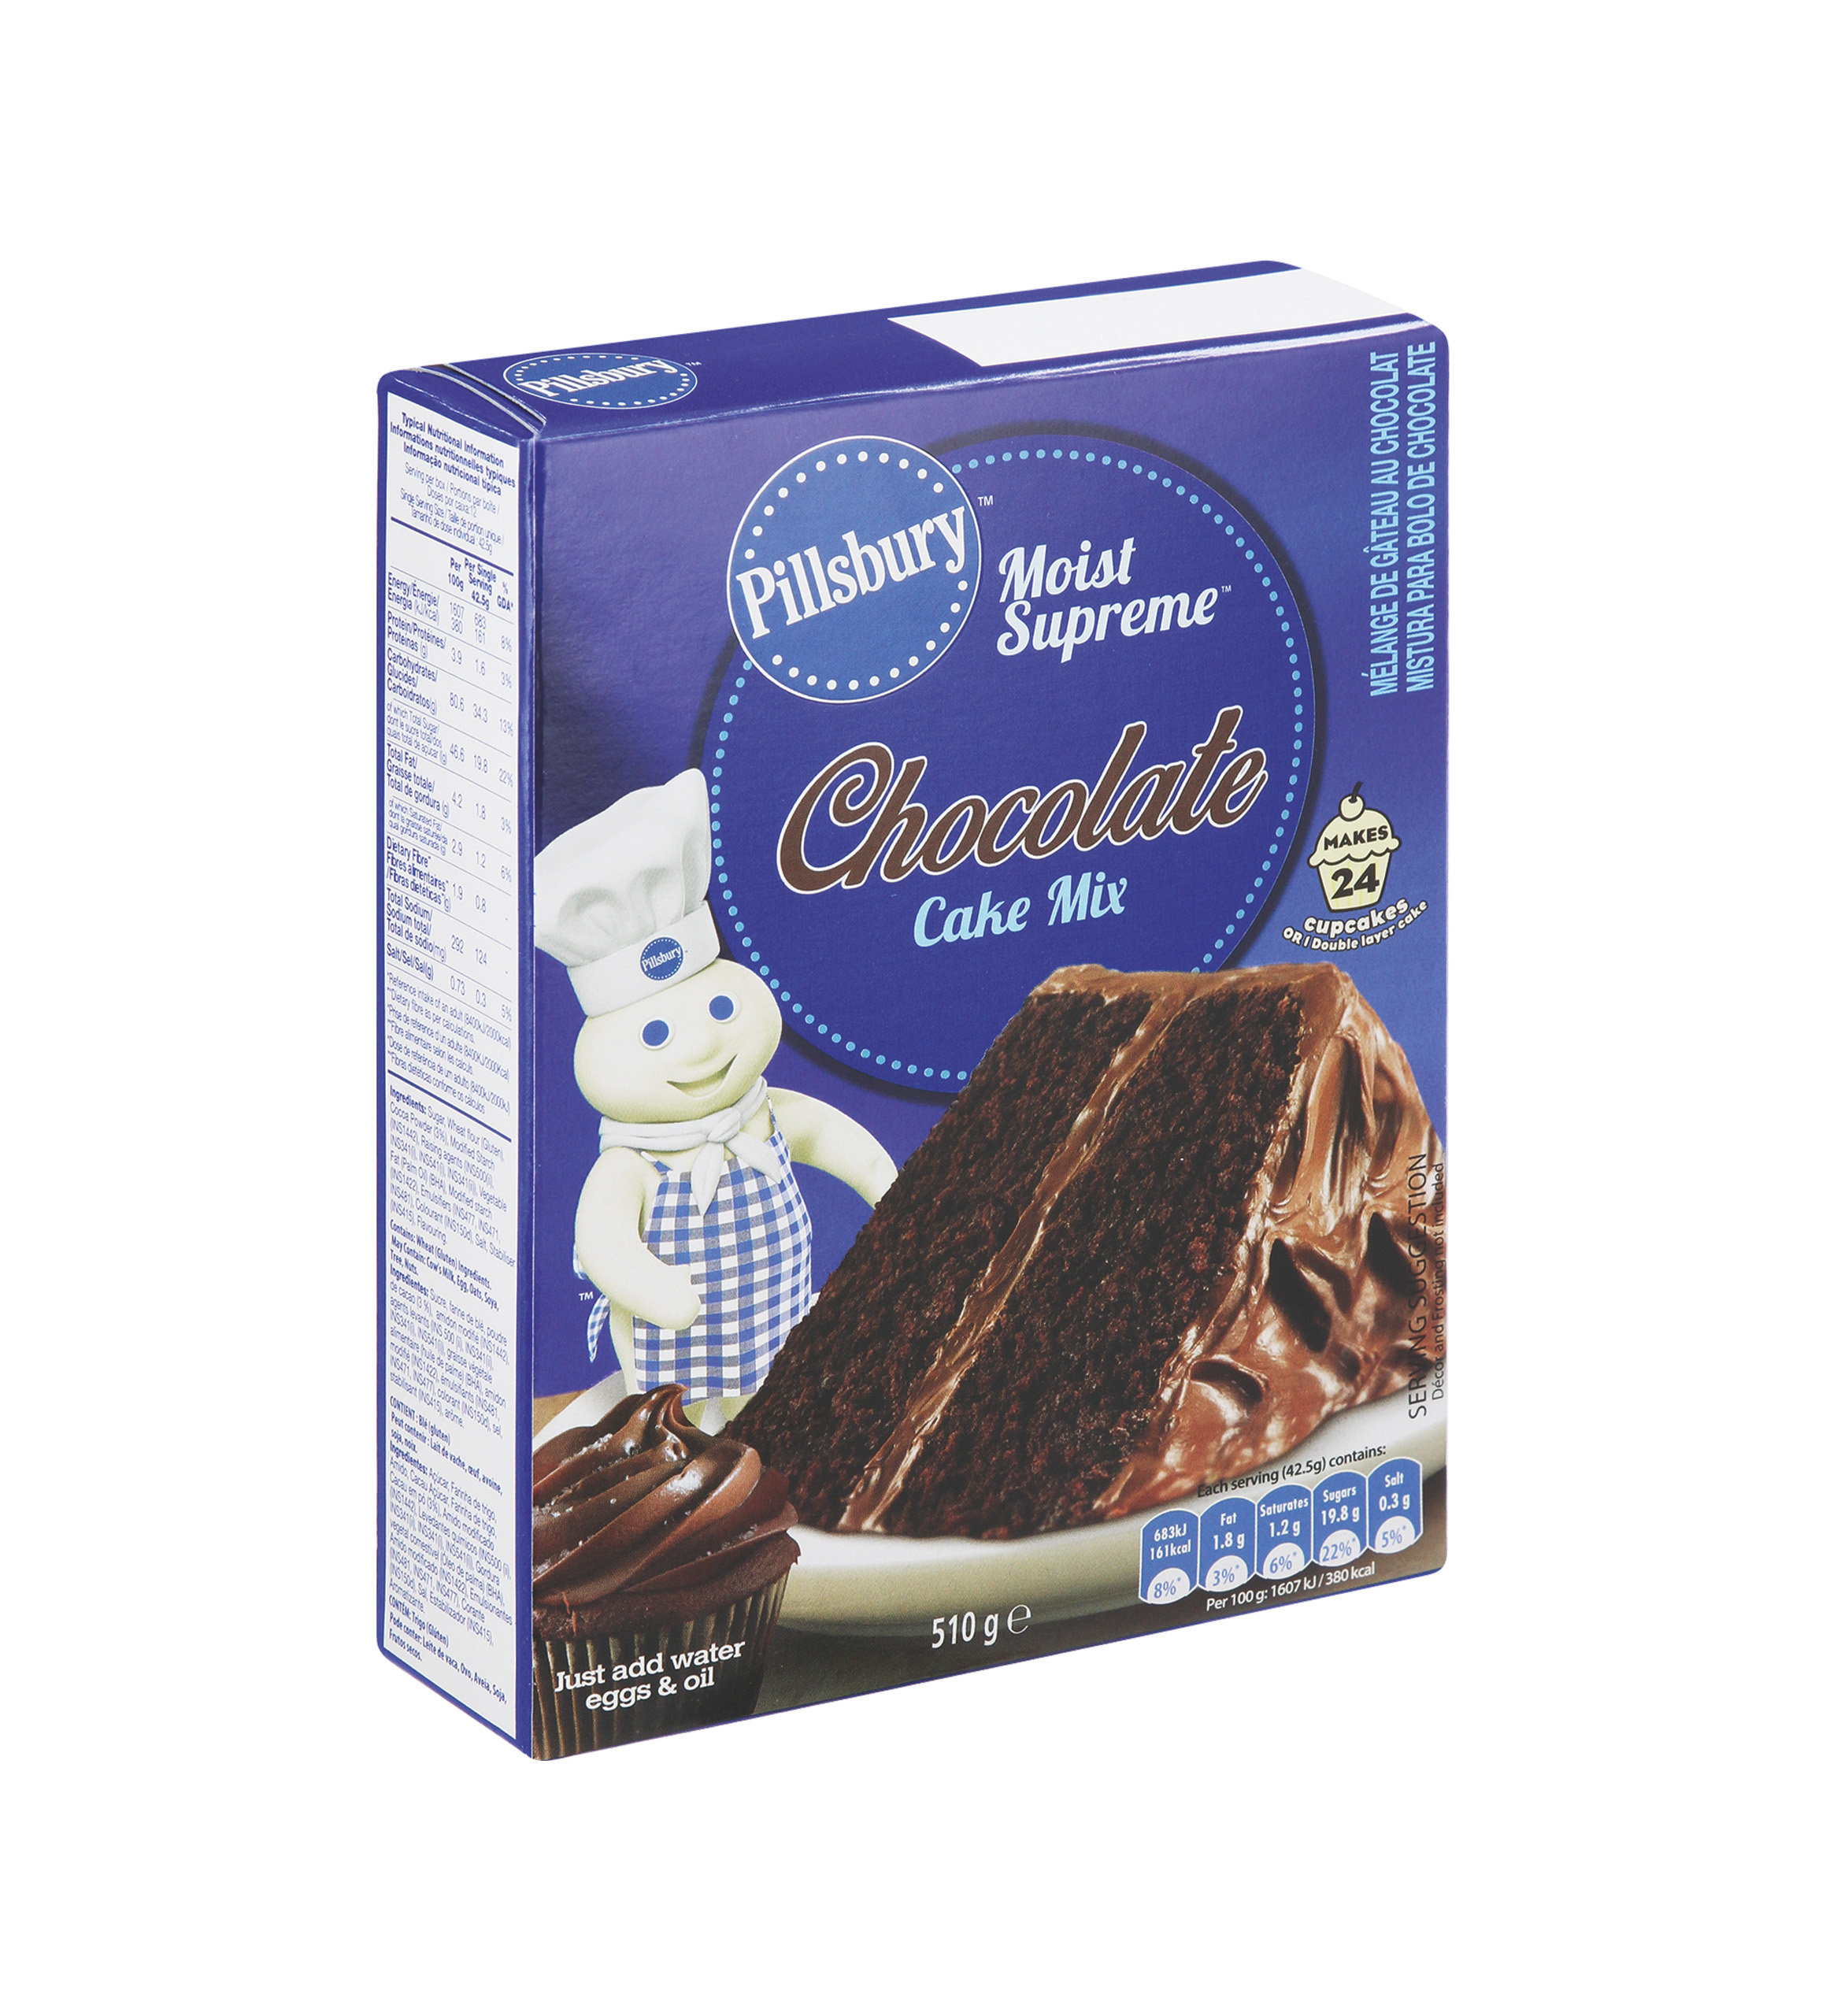 Pantry] Pillsbury Cookie Cake Choco Trio, 320g (Pack of 2) Rs 160 At Amazon  - Delsheaven